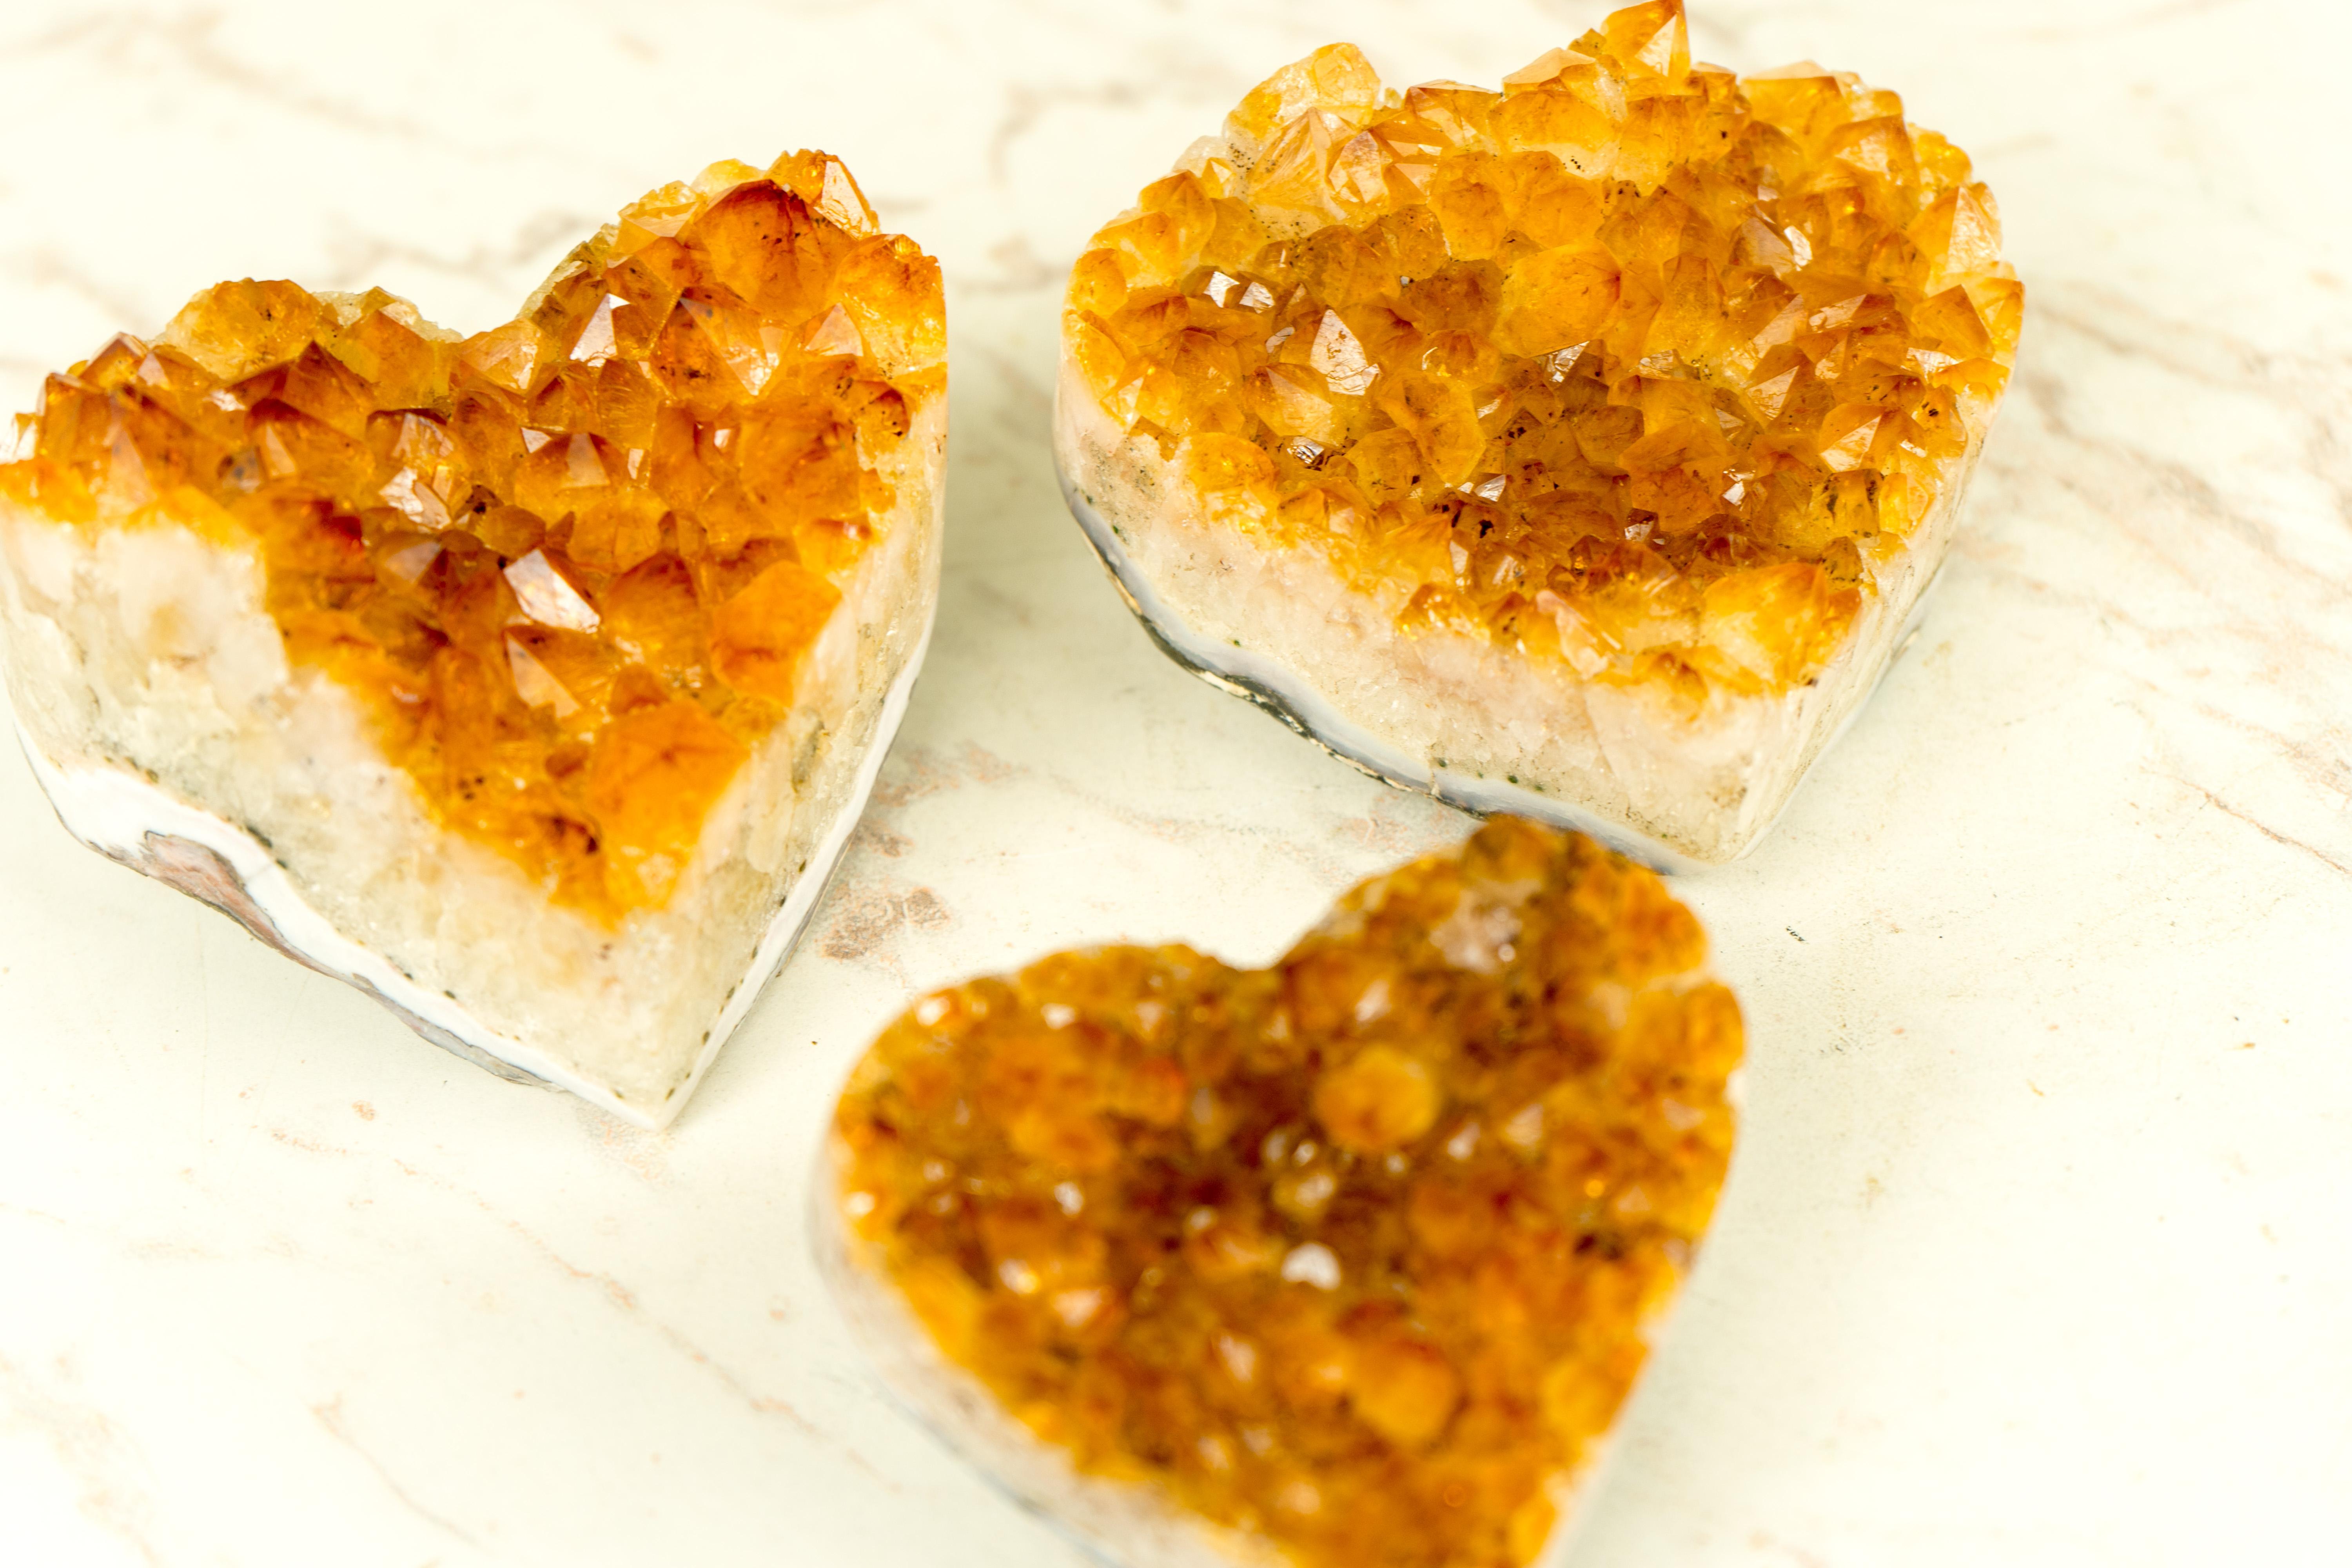 We have selected this set of Citrine Hearts based on their high quality, deep orange color, and overall beauty and luster. Each heart brings unique characteristics, including Goethite inclusions, perfect natural points, and more. These crystal